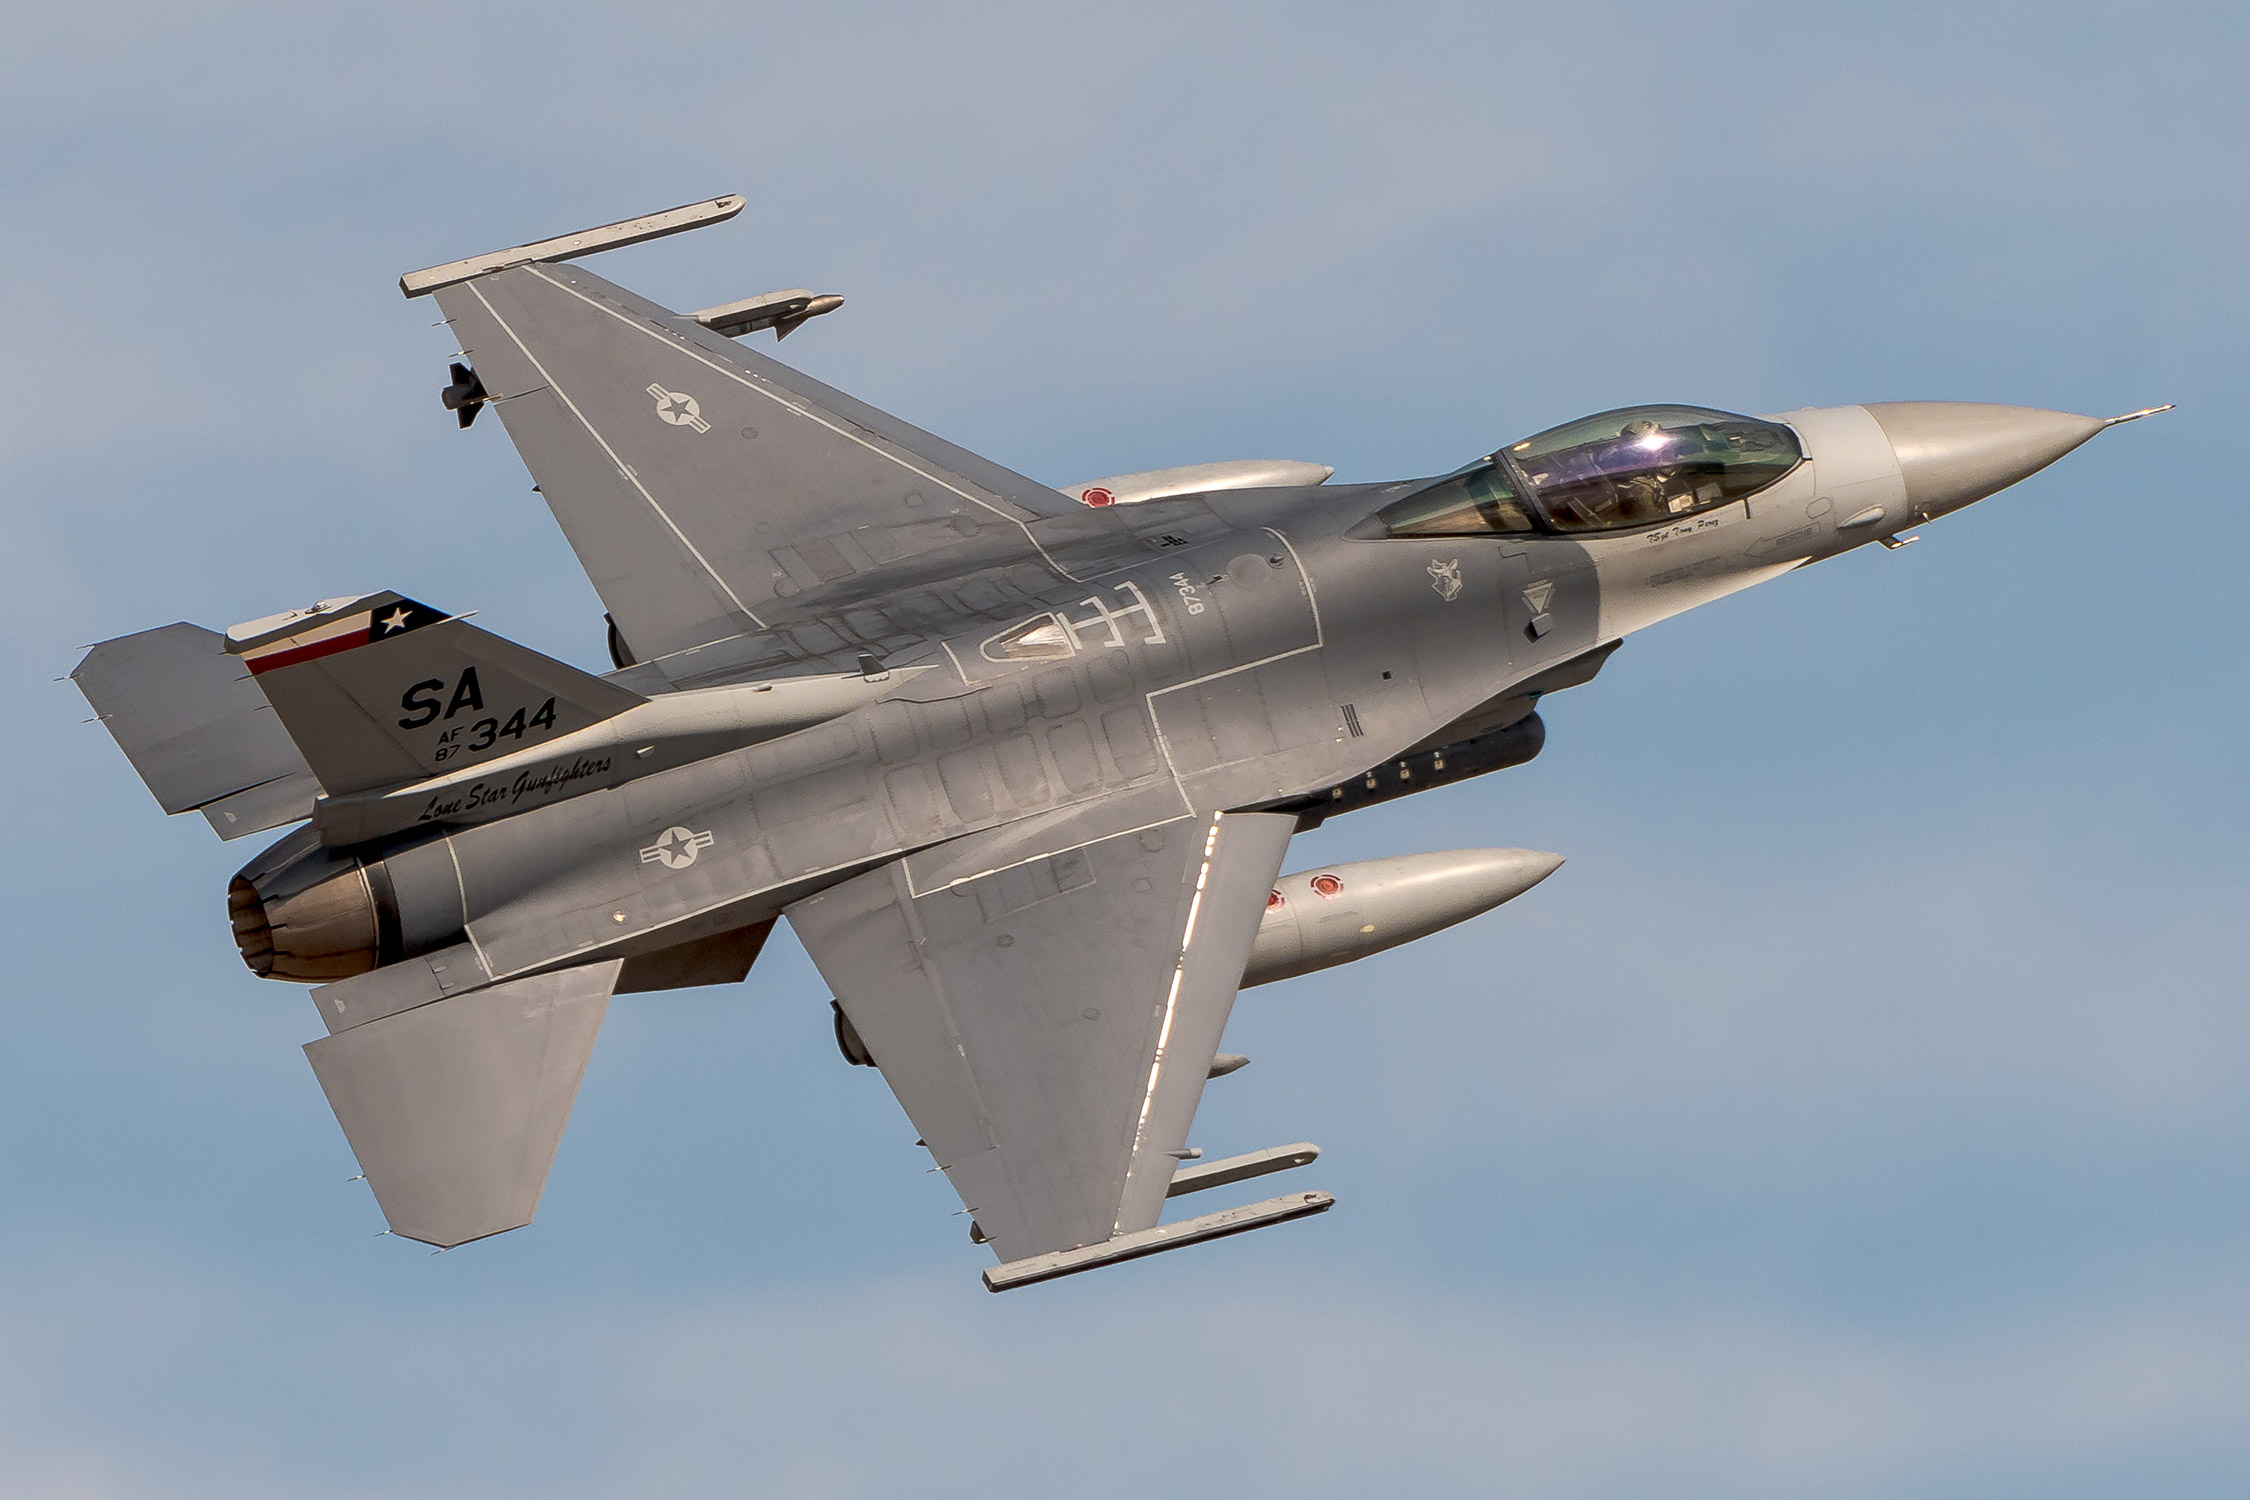 US Air Force F-16 fighter jet crashes in Germany